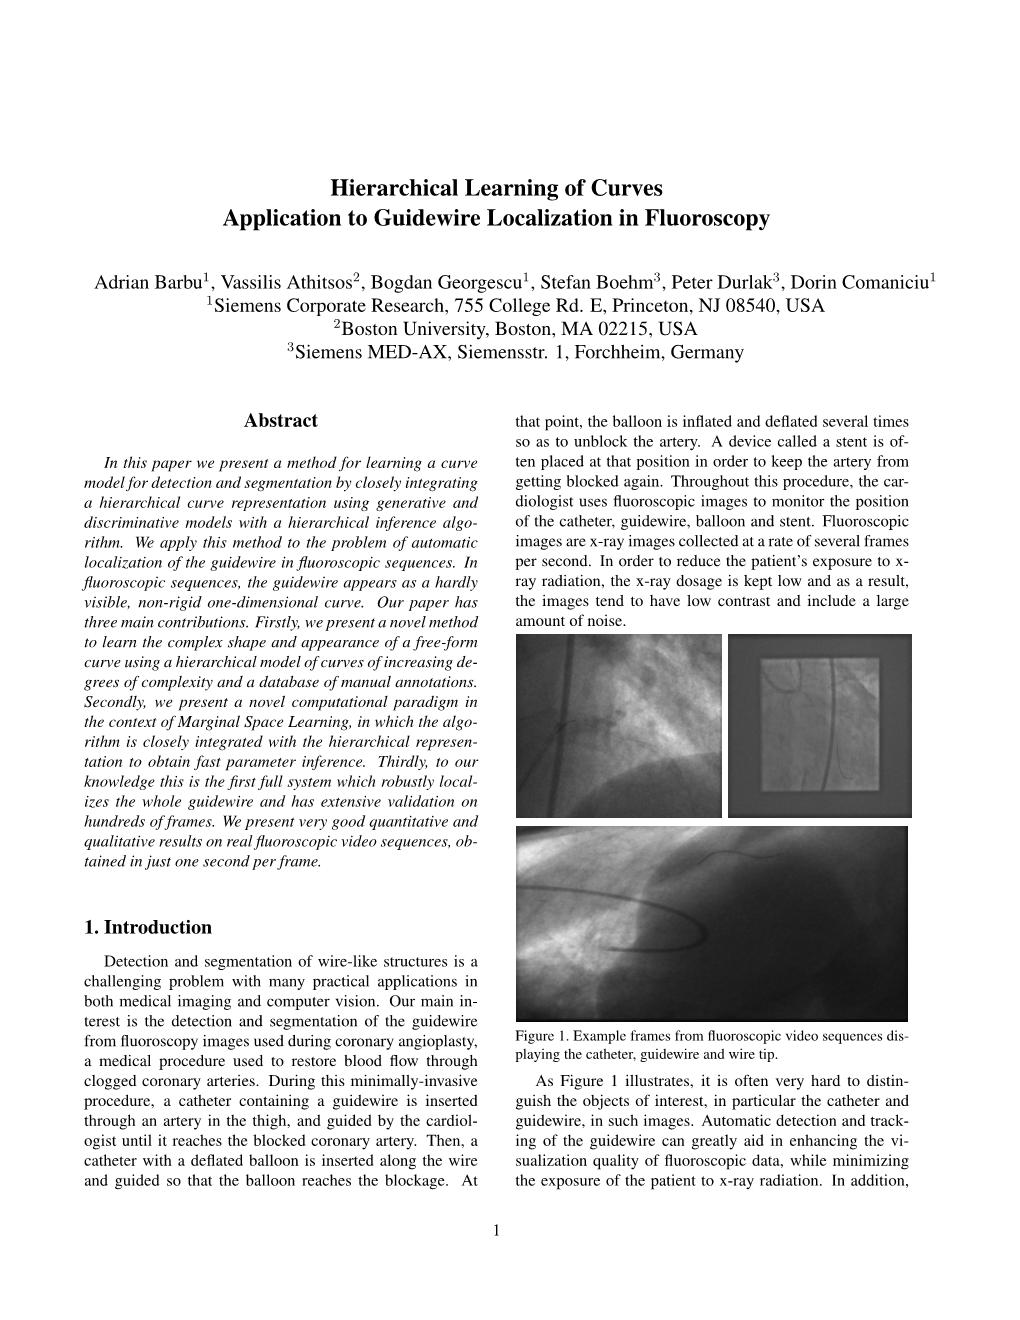 Hierarchical Learning of Curves Application to Guidewire Localization in Fluoroscopy